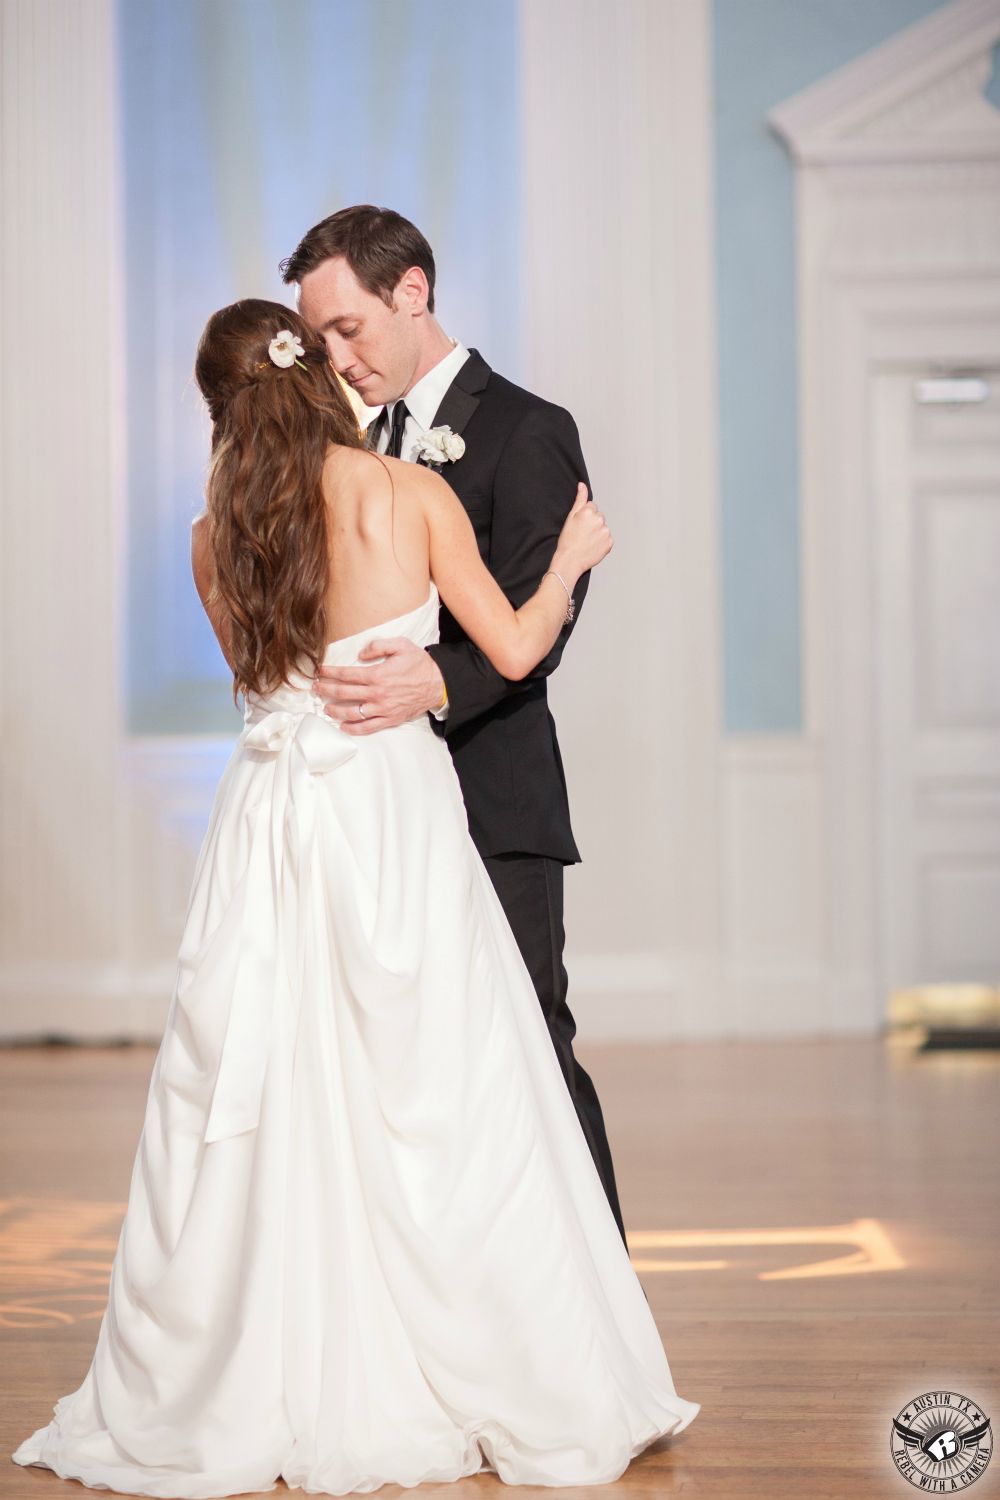 Austin wedding photography of first dance of bride in strapless wedding gown and groom in black tuxedo in the light blue ballroom at the Texas Federation of Women's Clubs Mansion Headquarters with the Rocket Brothers Band playing coordinated by Clearly Classy Events Austin wedding planner.